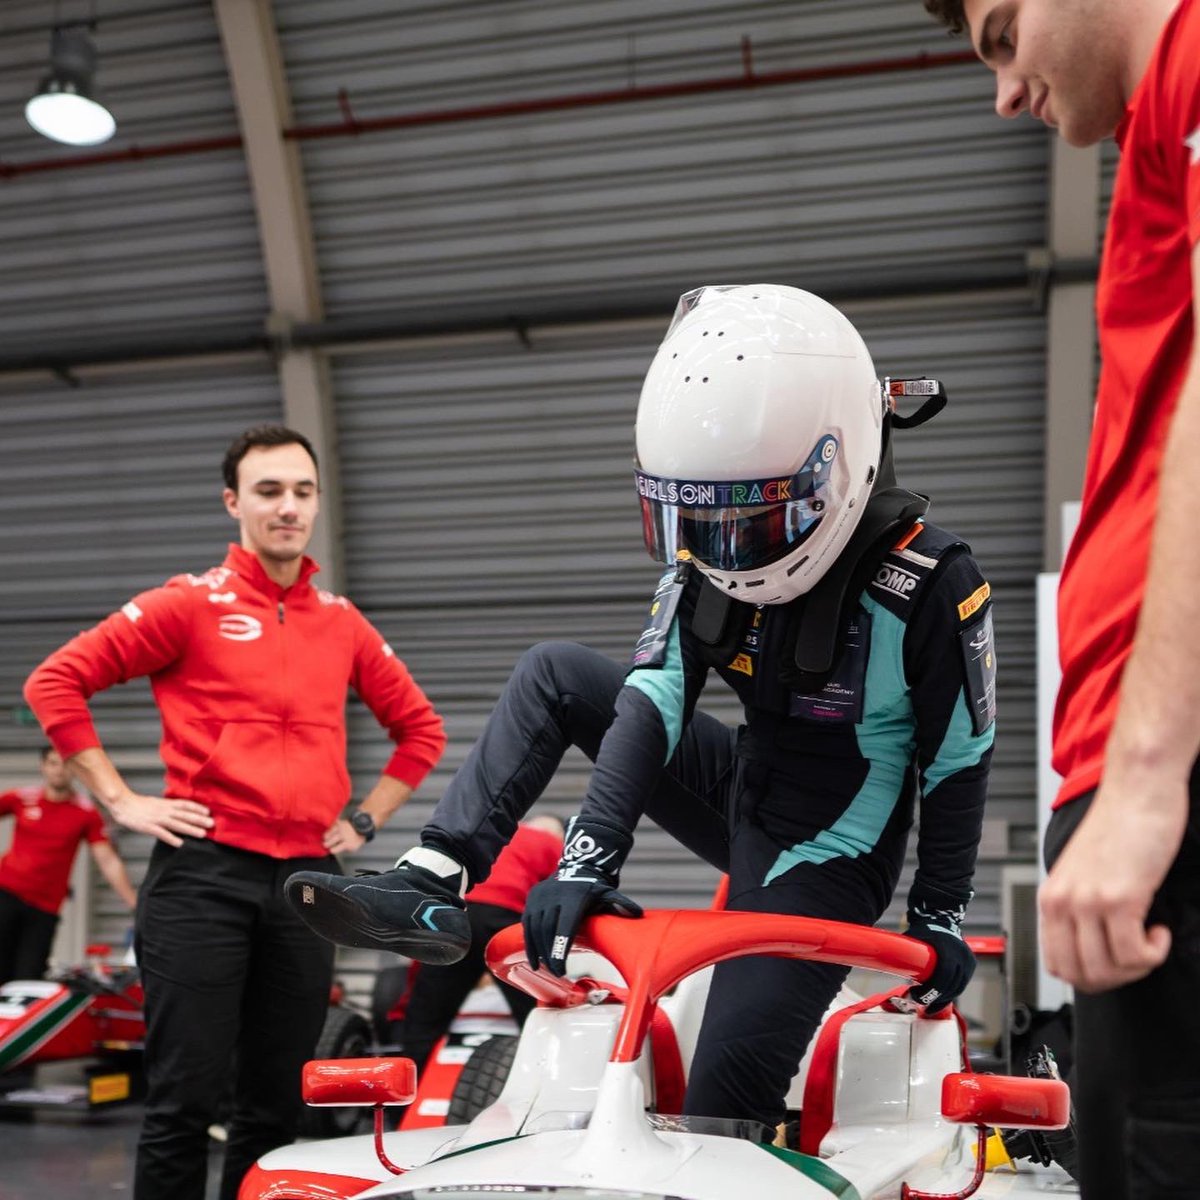 FIA Girls on Track – Rising Stars day 2🌟 Take a look behind the scenes of the Senior Scouting Camp with technical training and track study with the seniors at the Fiorano circuit.📝🏁 #GirlsonTrack #RisingStars #WomenInMotorSport #FDA #IronDames #BeAnIronDames